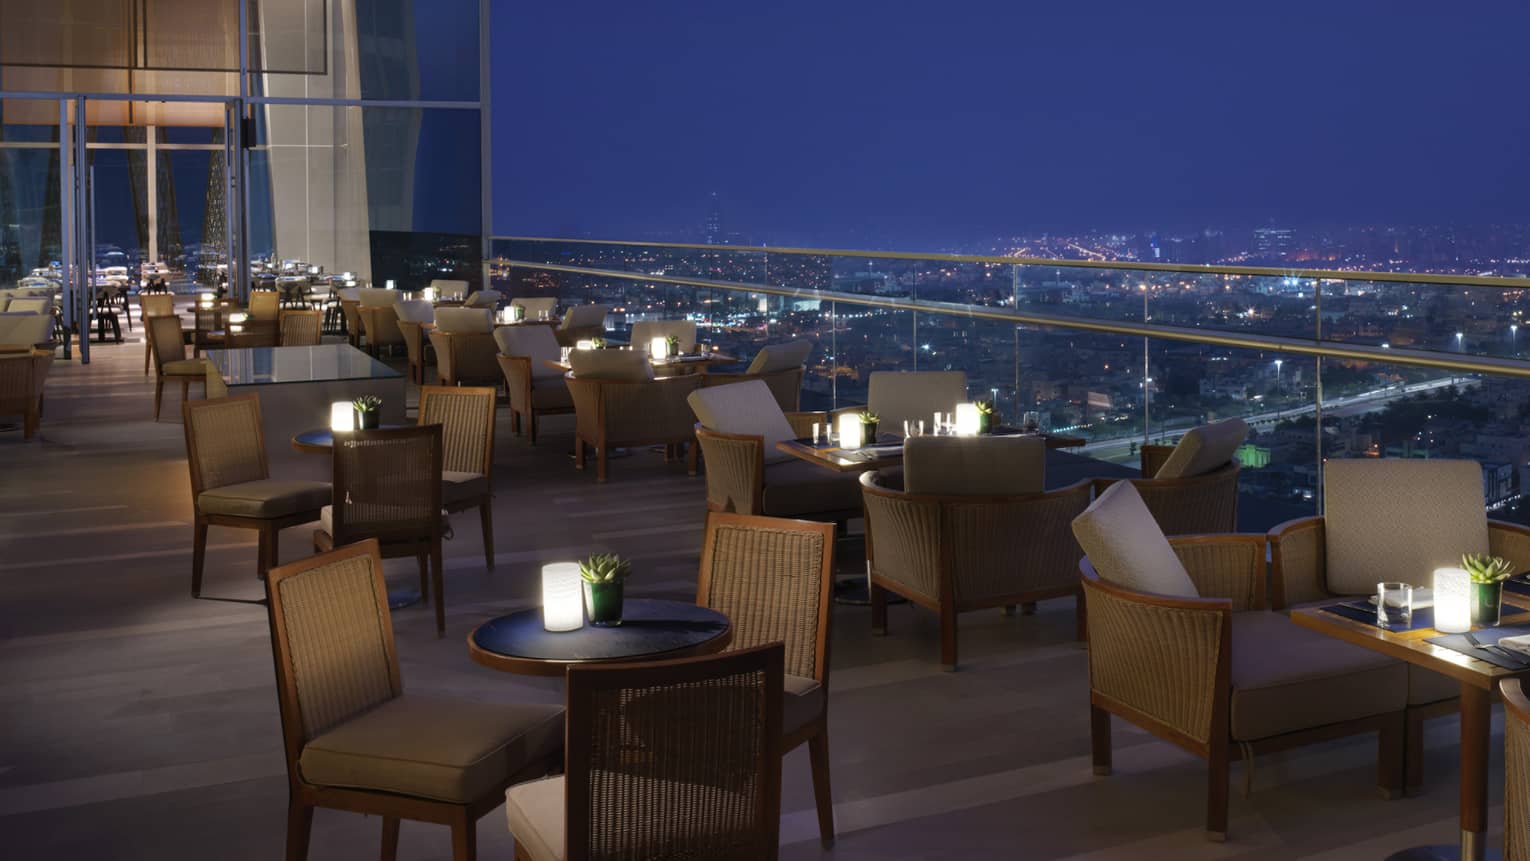 Several small chairs set up on an outdoor terrace overlooking the cityscape of Dubai.